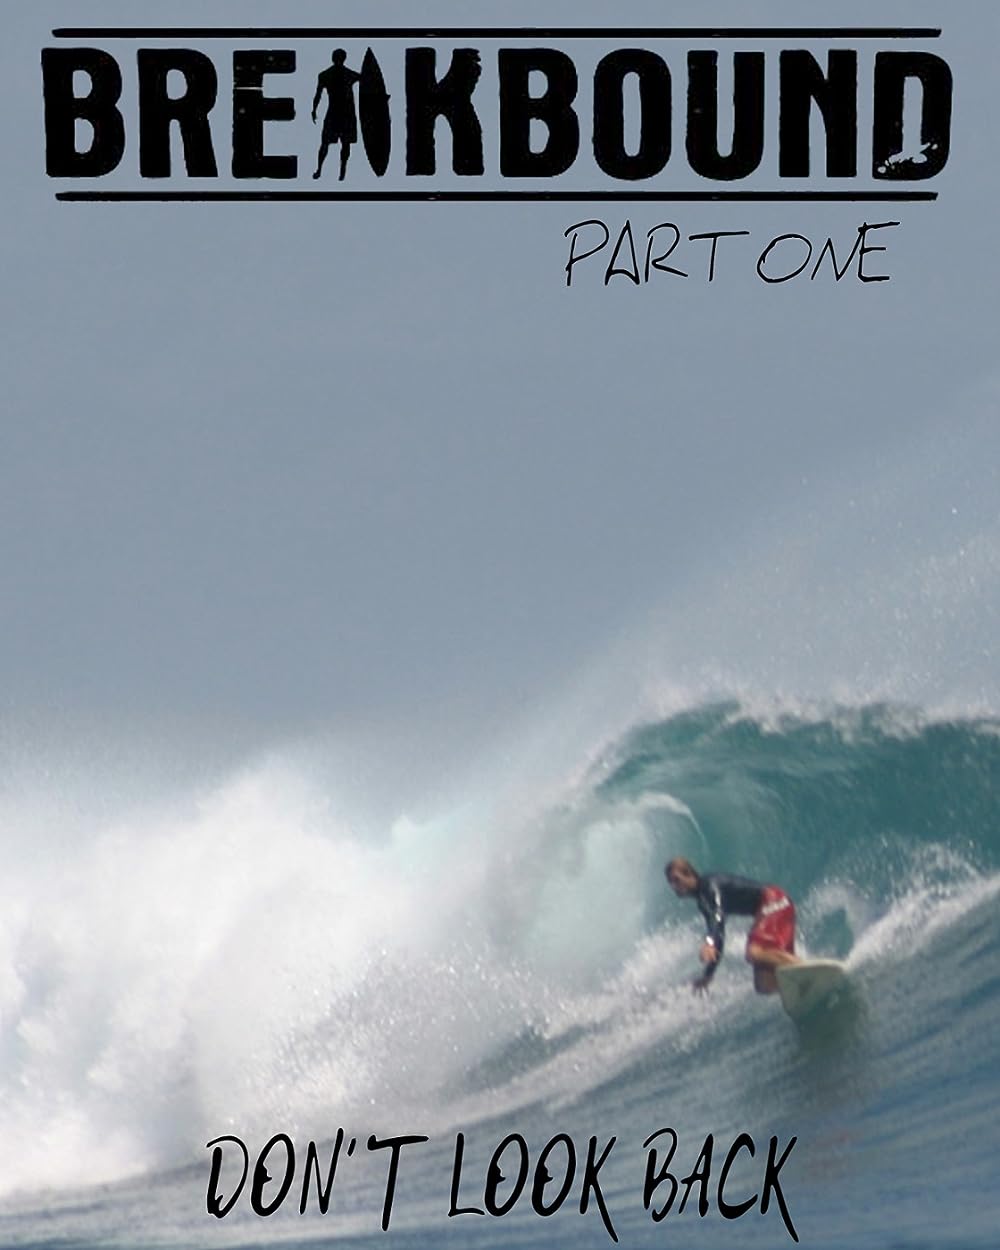 A man surfing on a wave on a sunny blue day, the title Breakbound Part 1 is at the top while the subtext on the bottom reads: "Don't Look Back"